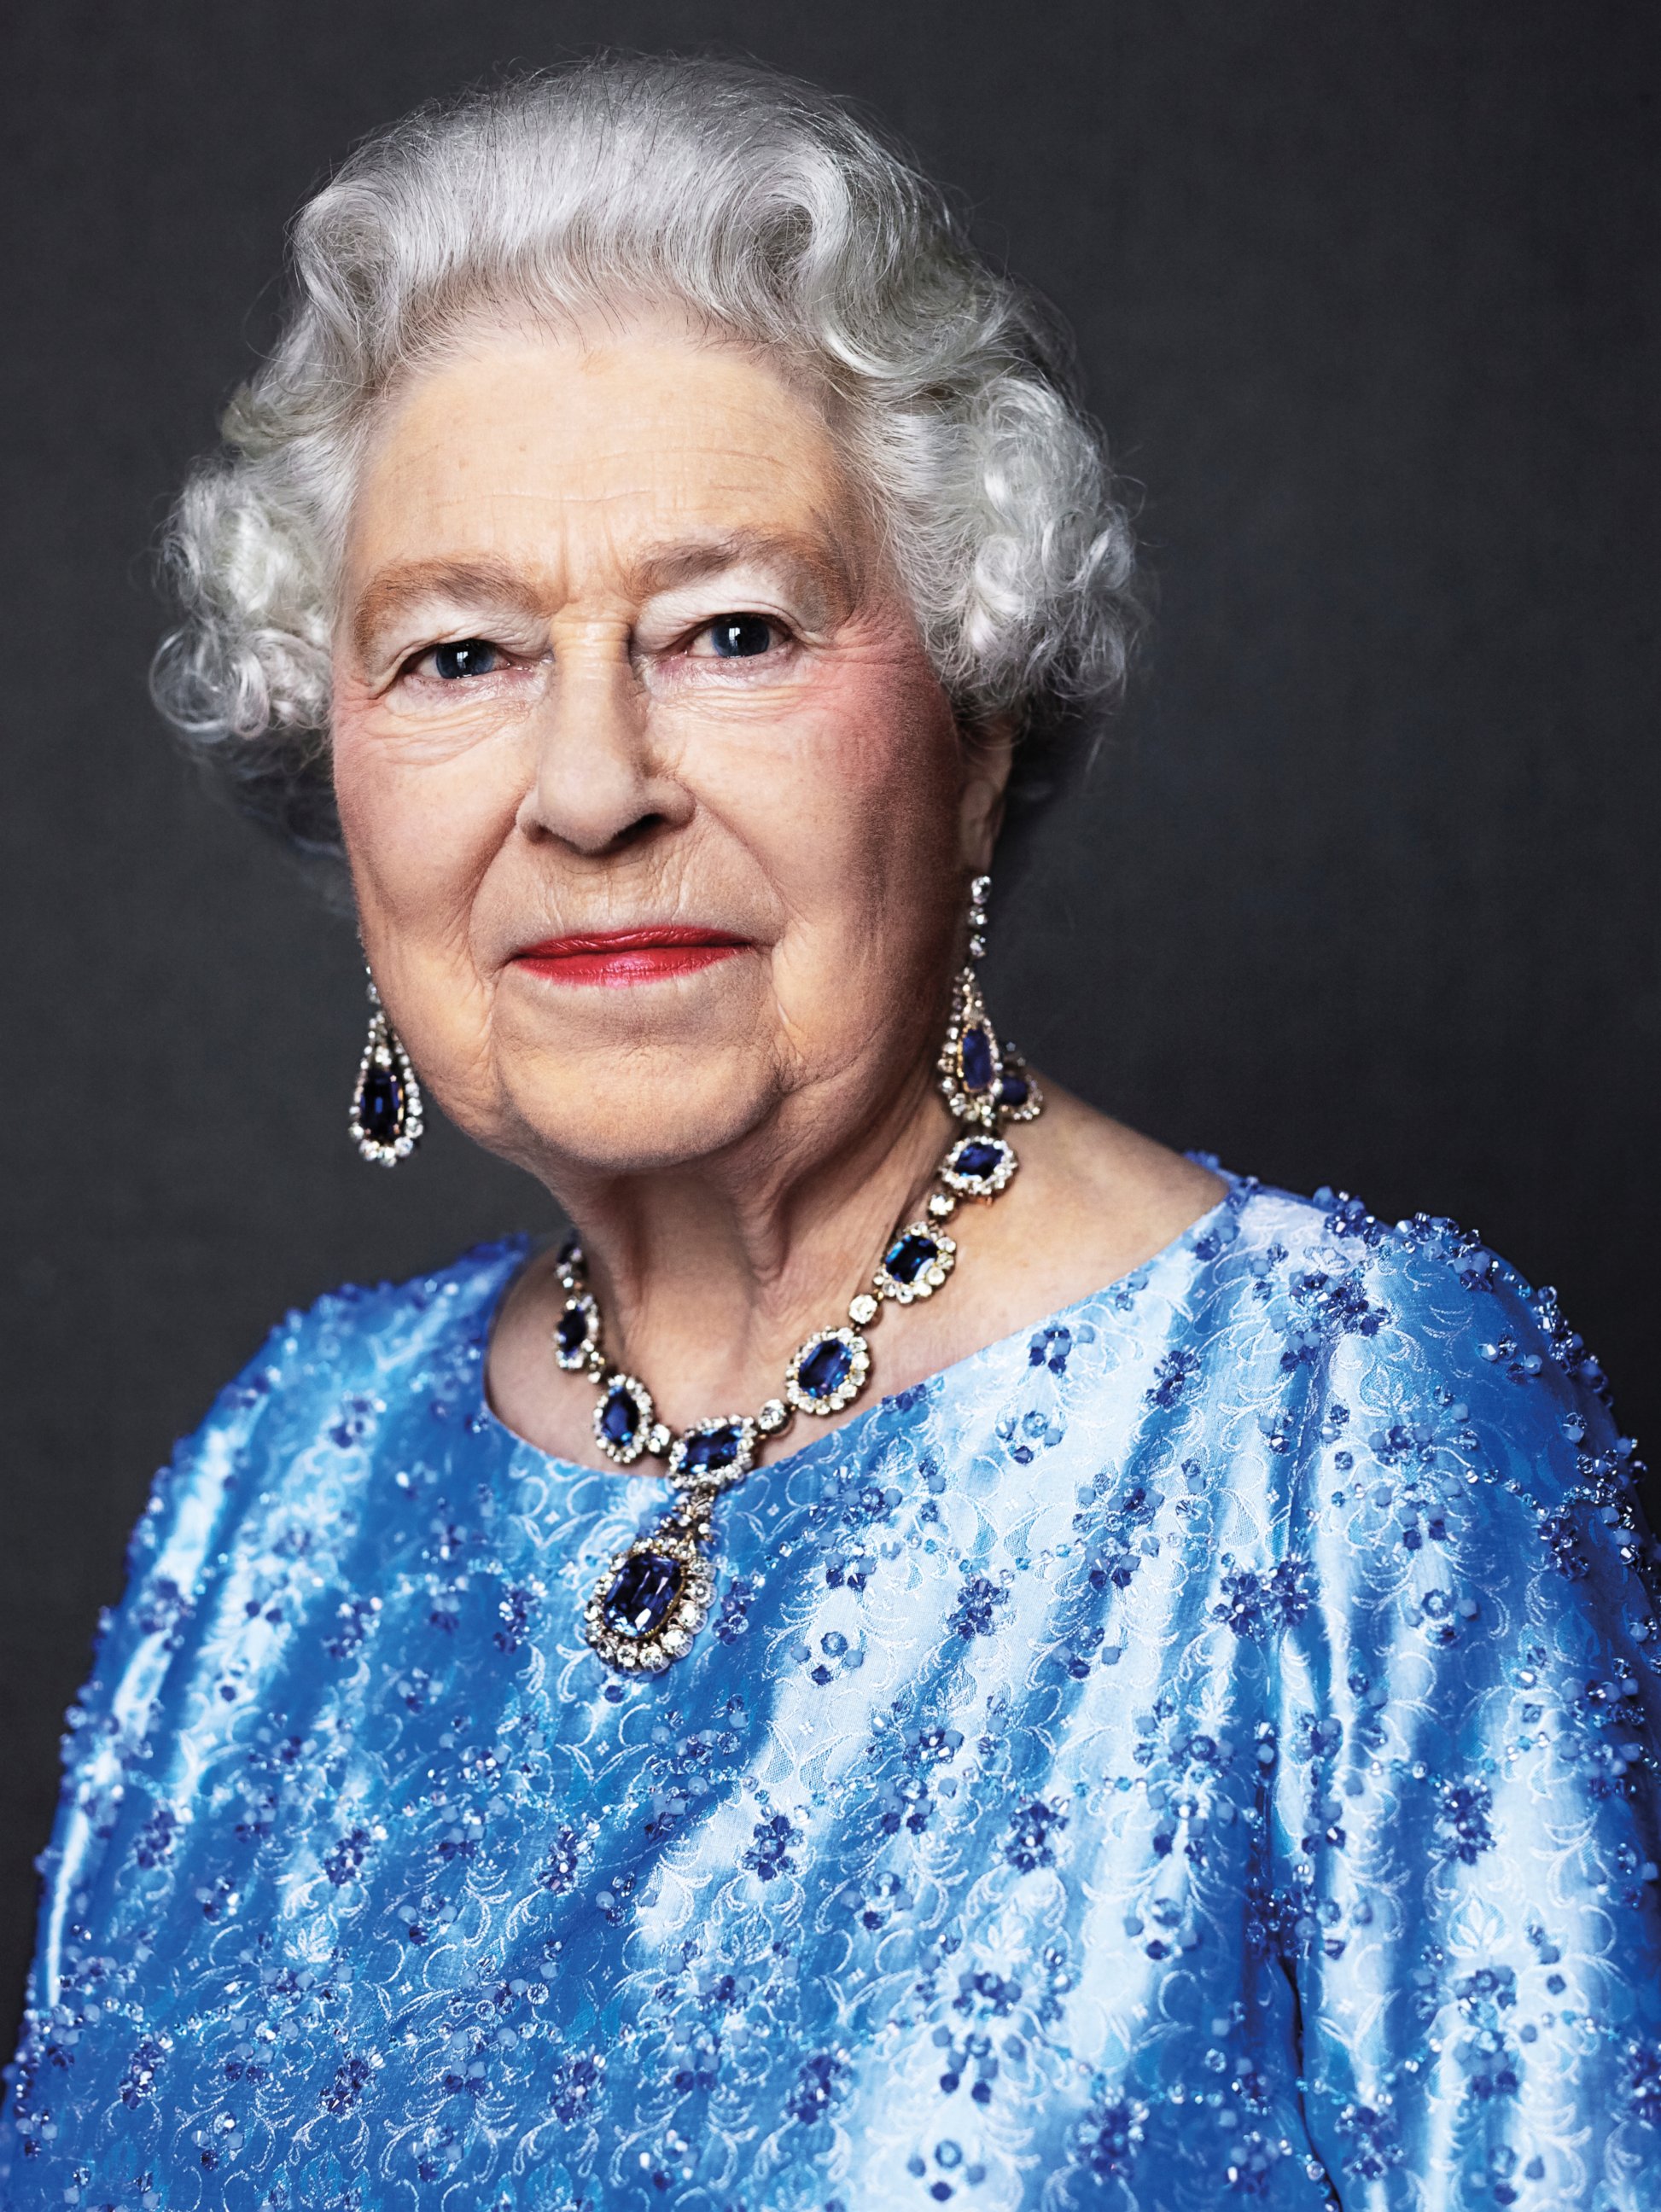 PHOTO: Queen Elizabeth II's photo is now reissued, Feb. 6, 2017, by Buckingham Palace to celebrate her Sapphire Anniversary, marking the 65th anniversary of the monarch's accession to the throne.